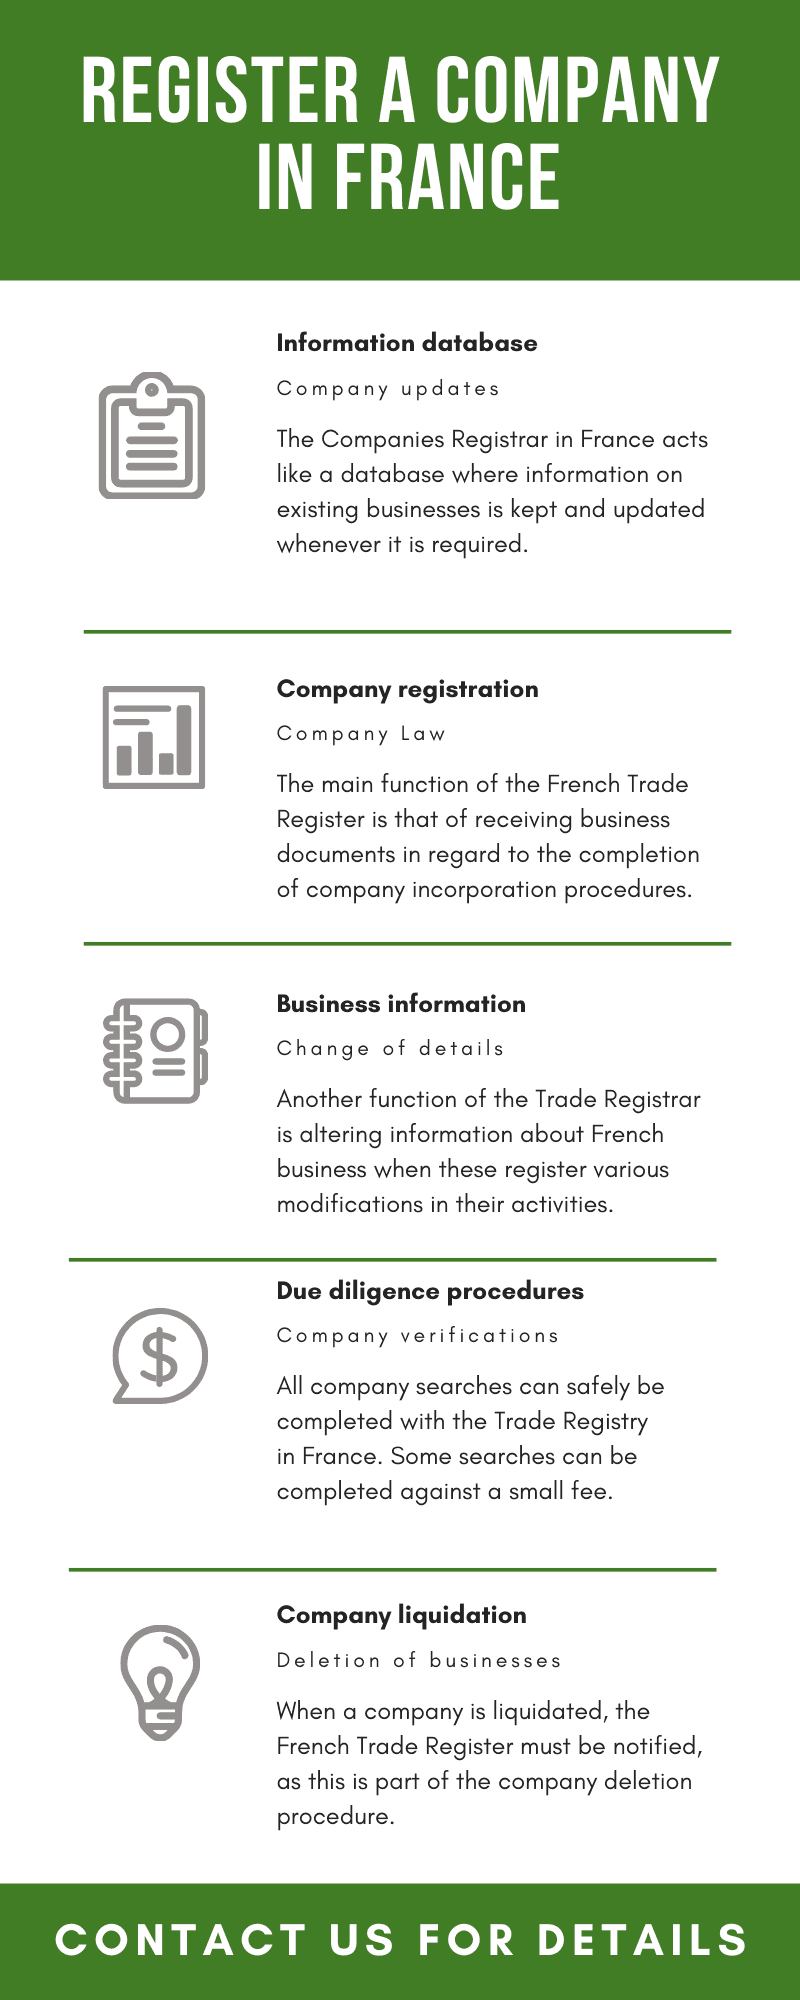 Register-a-company-in-France